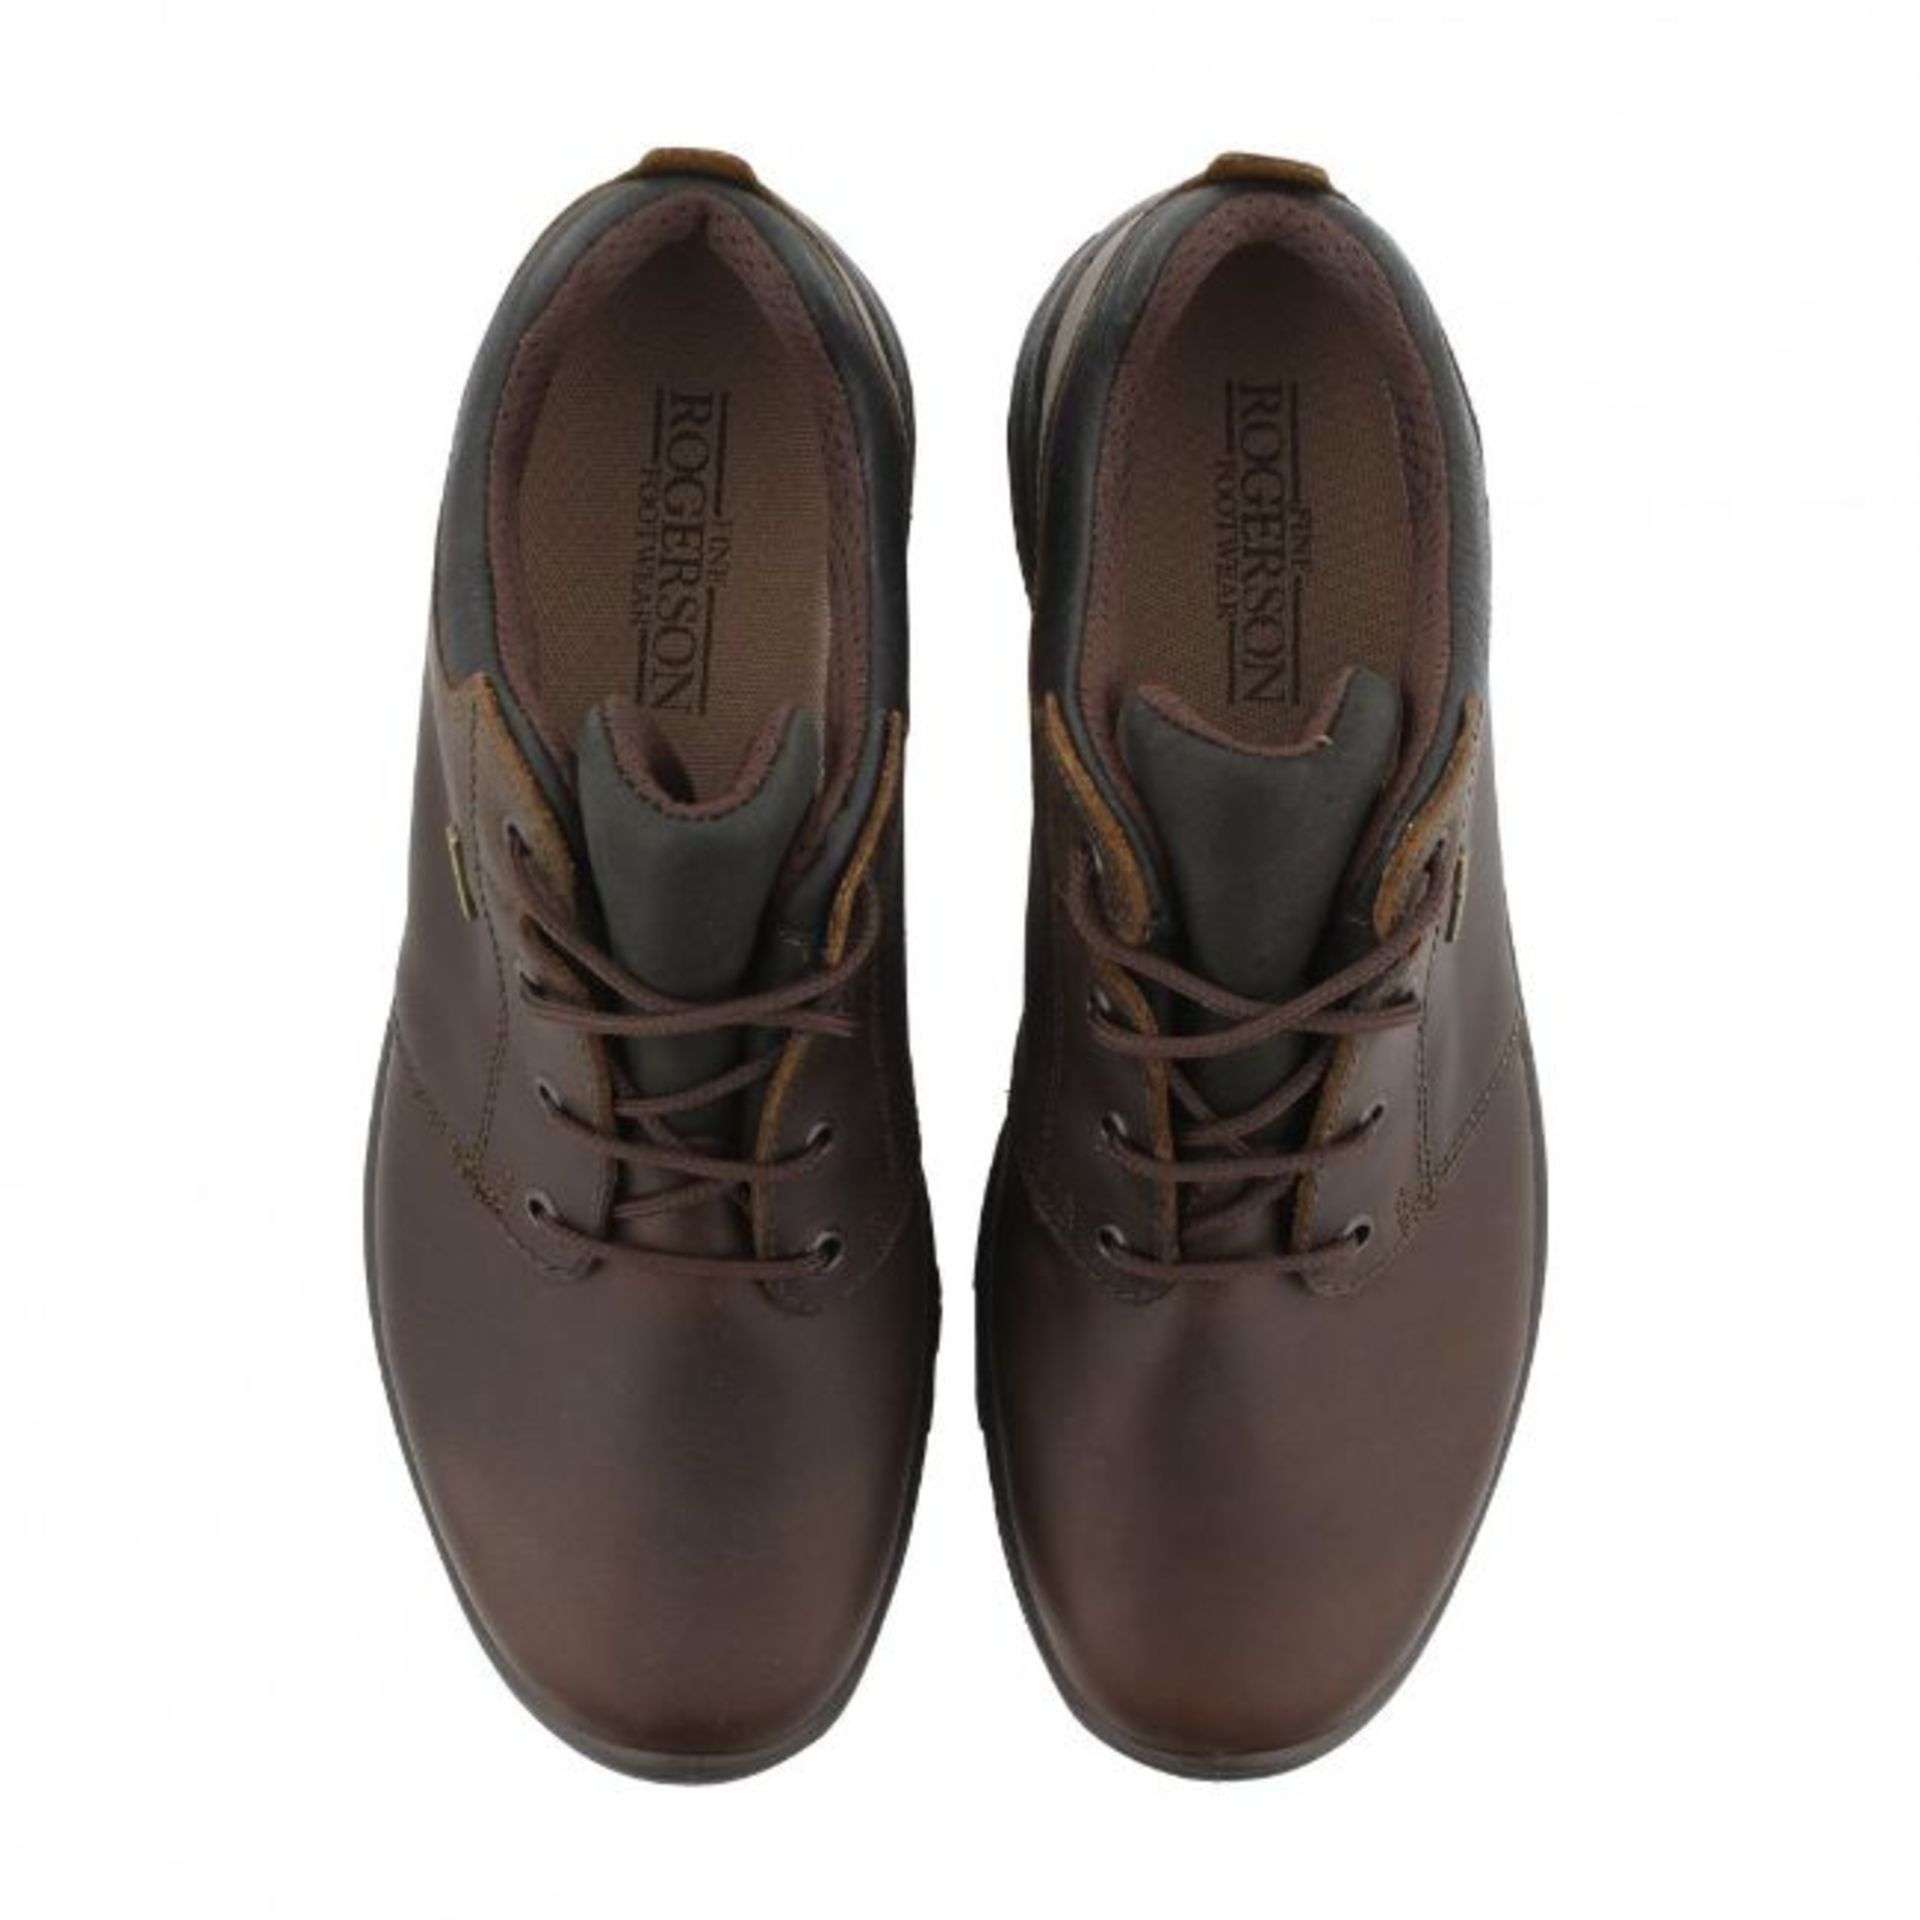 1 x Pair of Men's Grisport Brown Leather GriTex Shoes - Rogerson Footwear - Brand New and Boxed - - Image 4 of 8